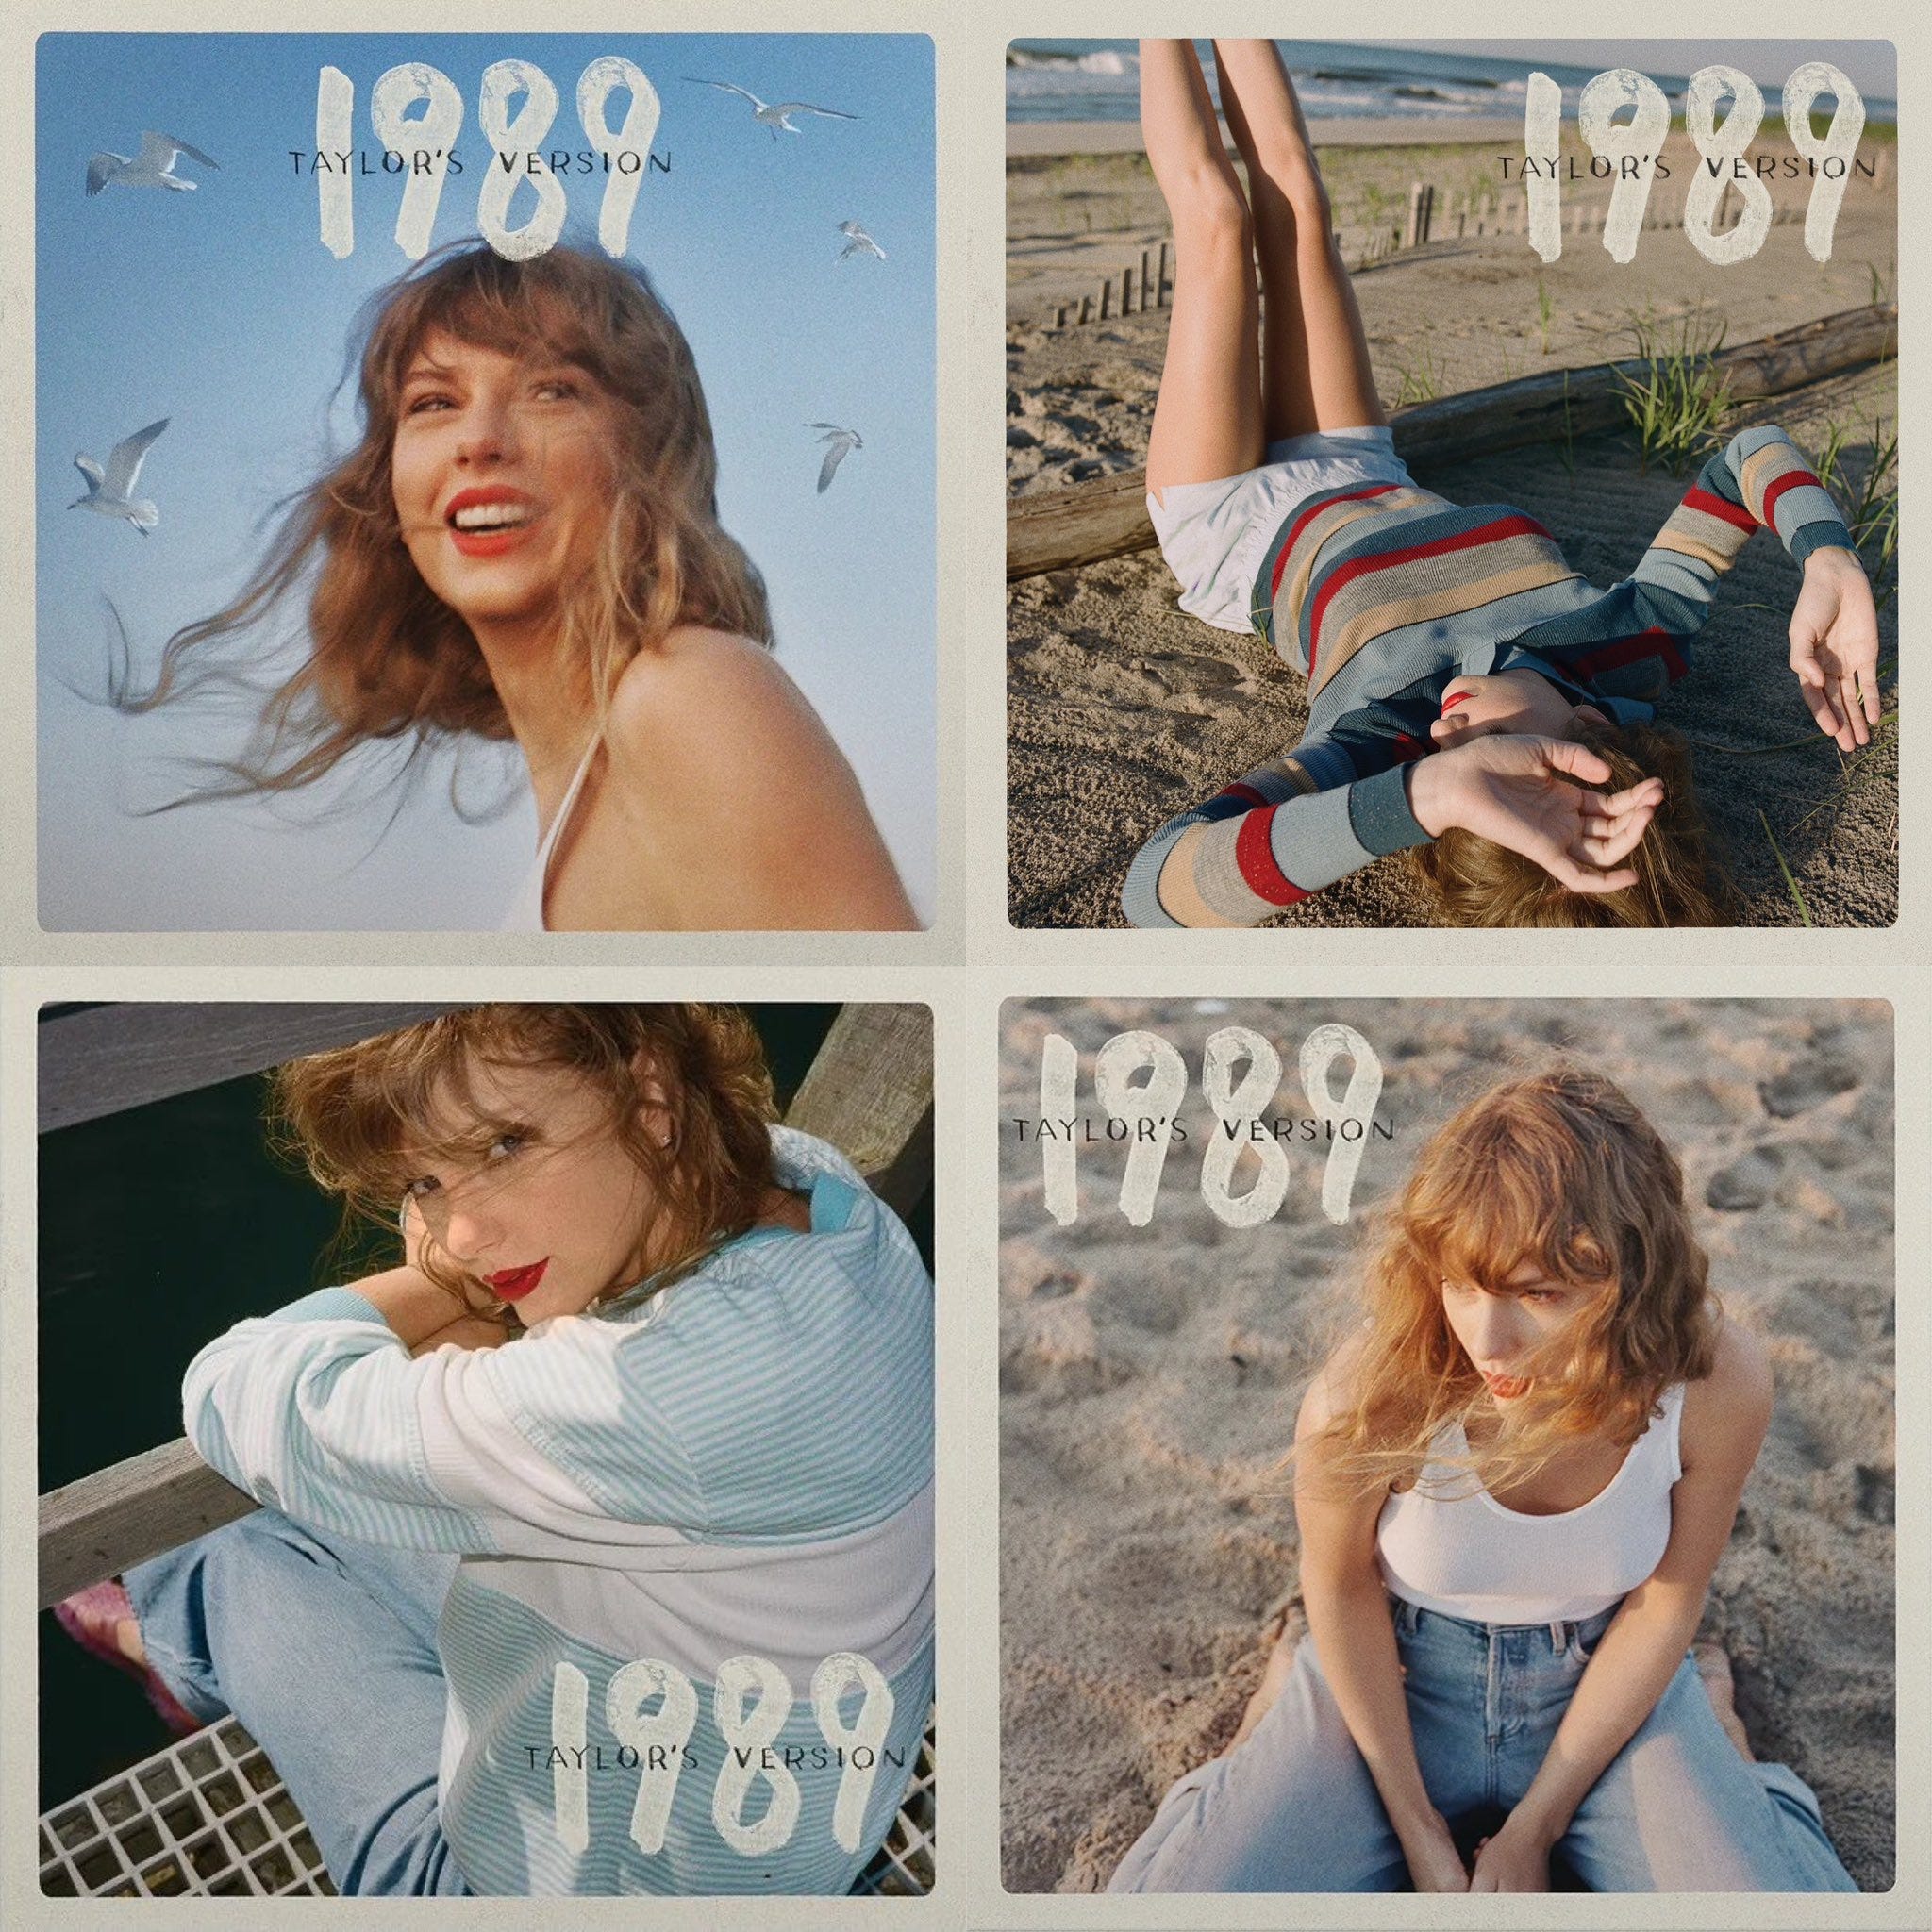 A Deep Dive Into 1989 (Taylor's Version) - by Abby Gardner